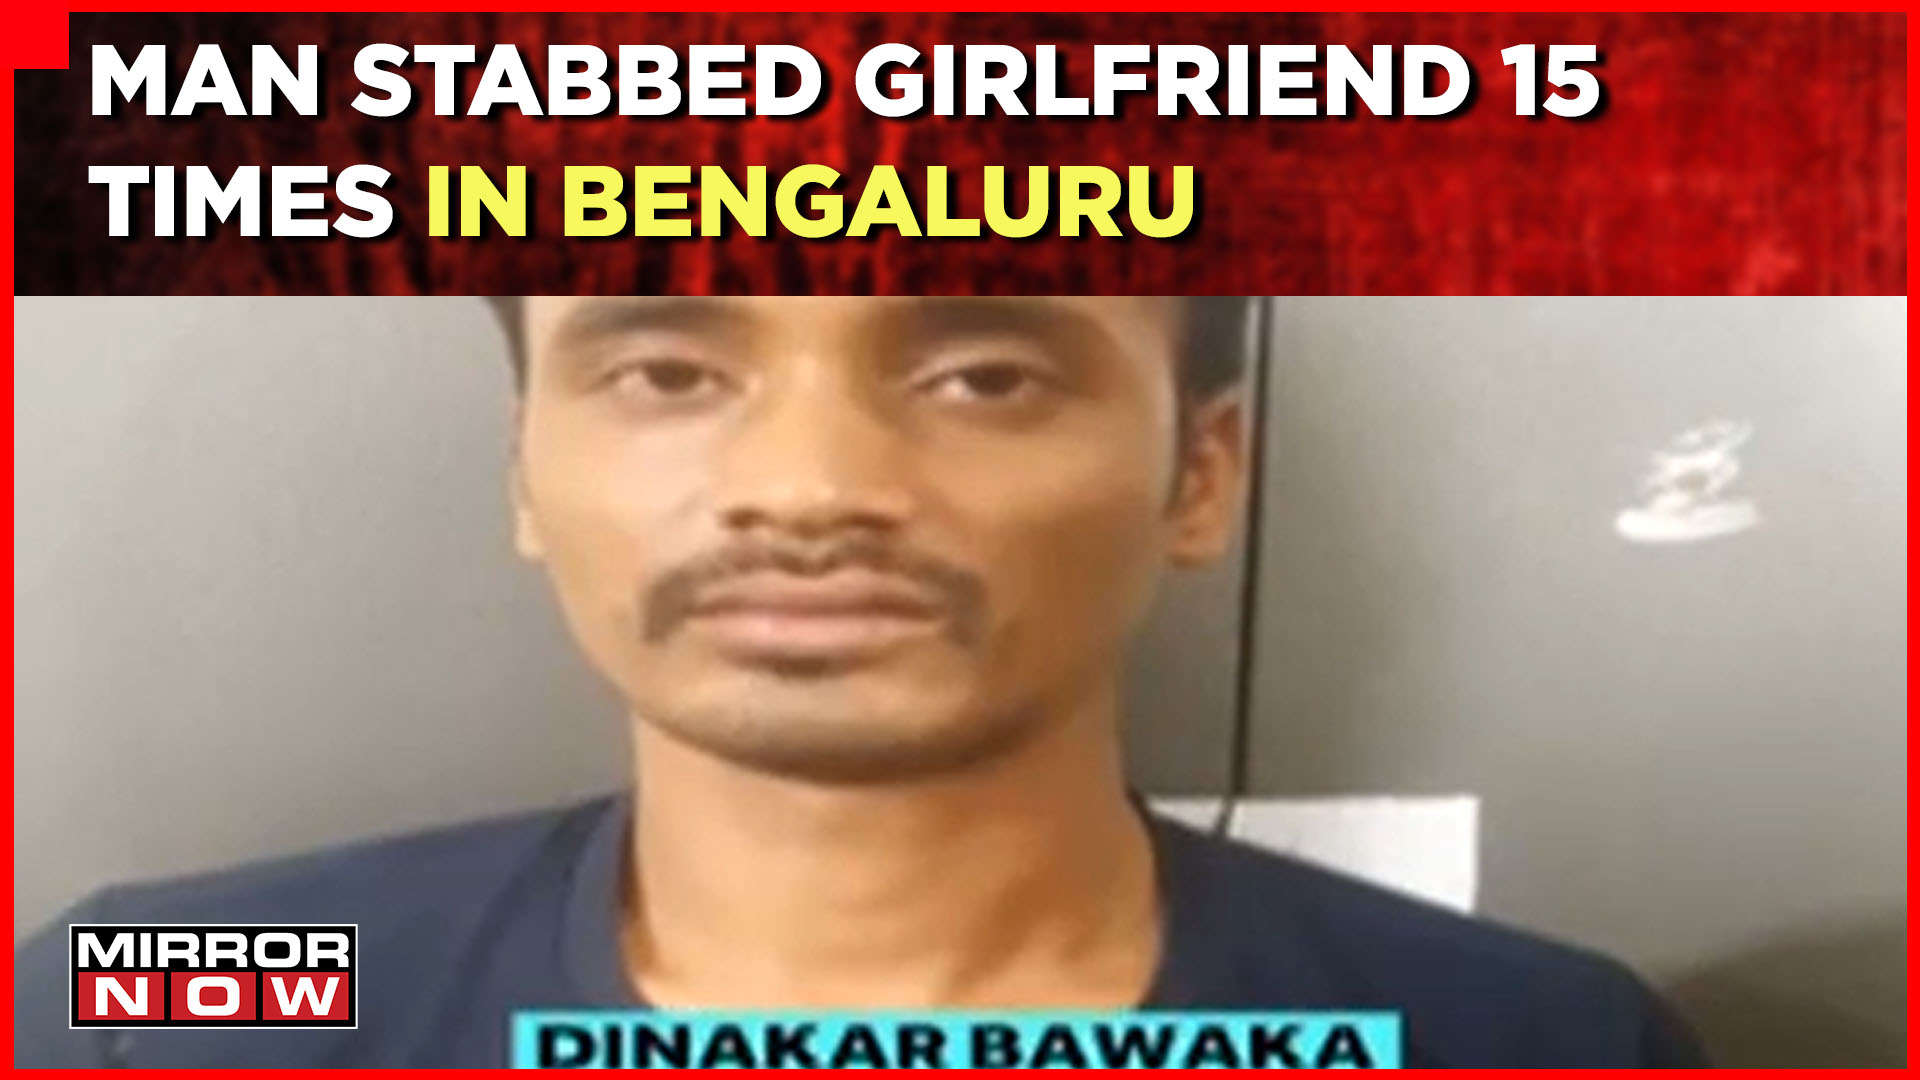 Man Stabbed Girlfriend 15 Times  Girls Family Objected Marriage Over Caste Differences  News